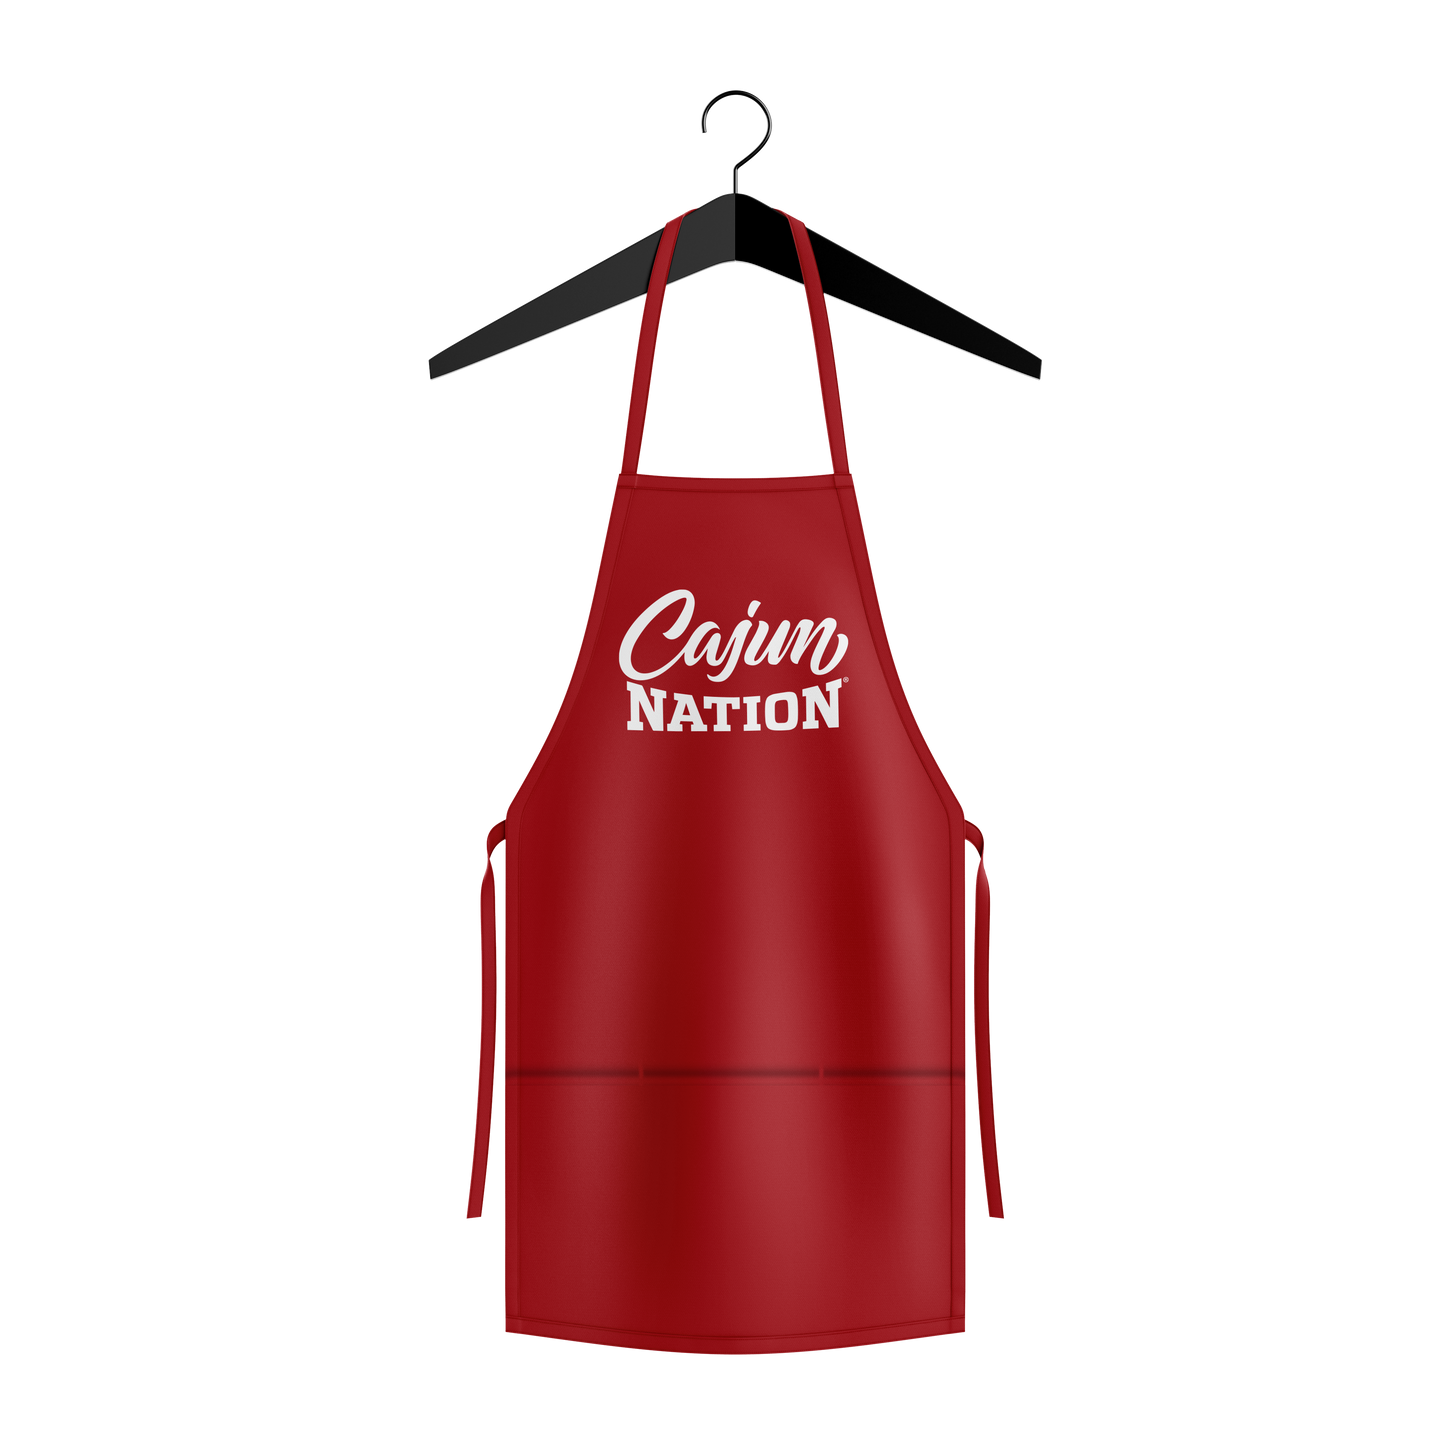 Cajun Nation Chef Red Classic Apron Length 34 Inches x Width 30 Inches (One Size Fits Most) Apron Length Type Mid-Length Color Red Features With Pockets Material Poly-Cotton Twill Number of Pockets 2 Type Bib Aprons Plastisol print